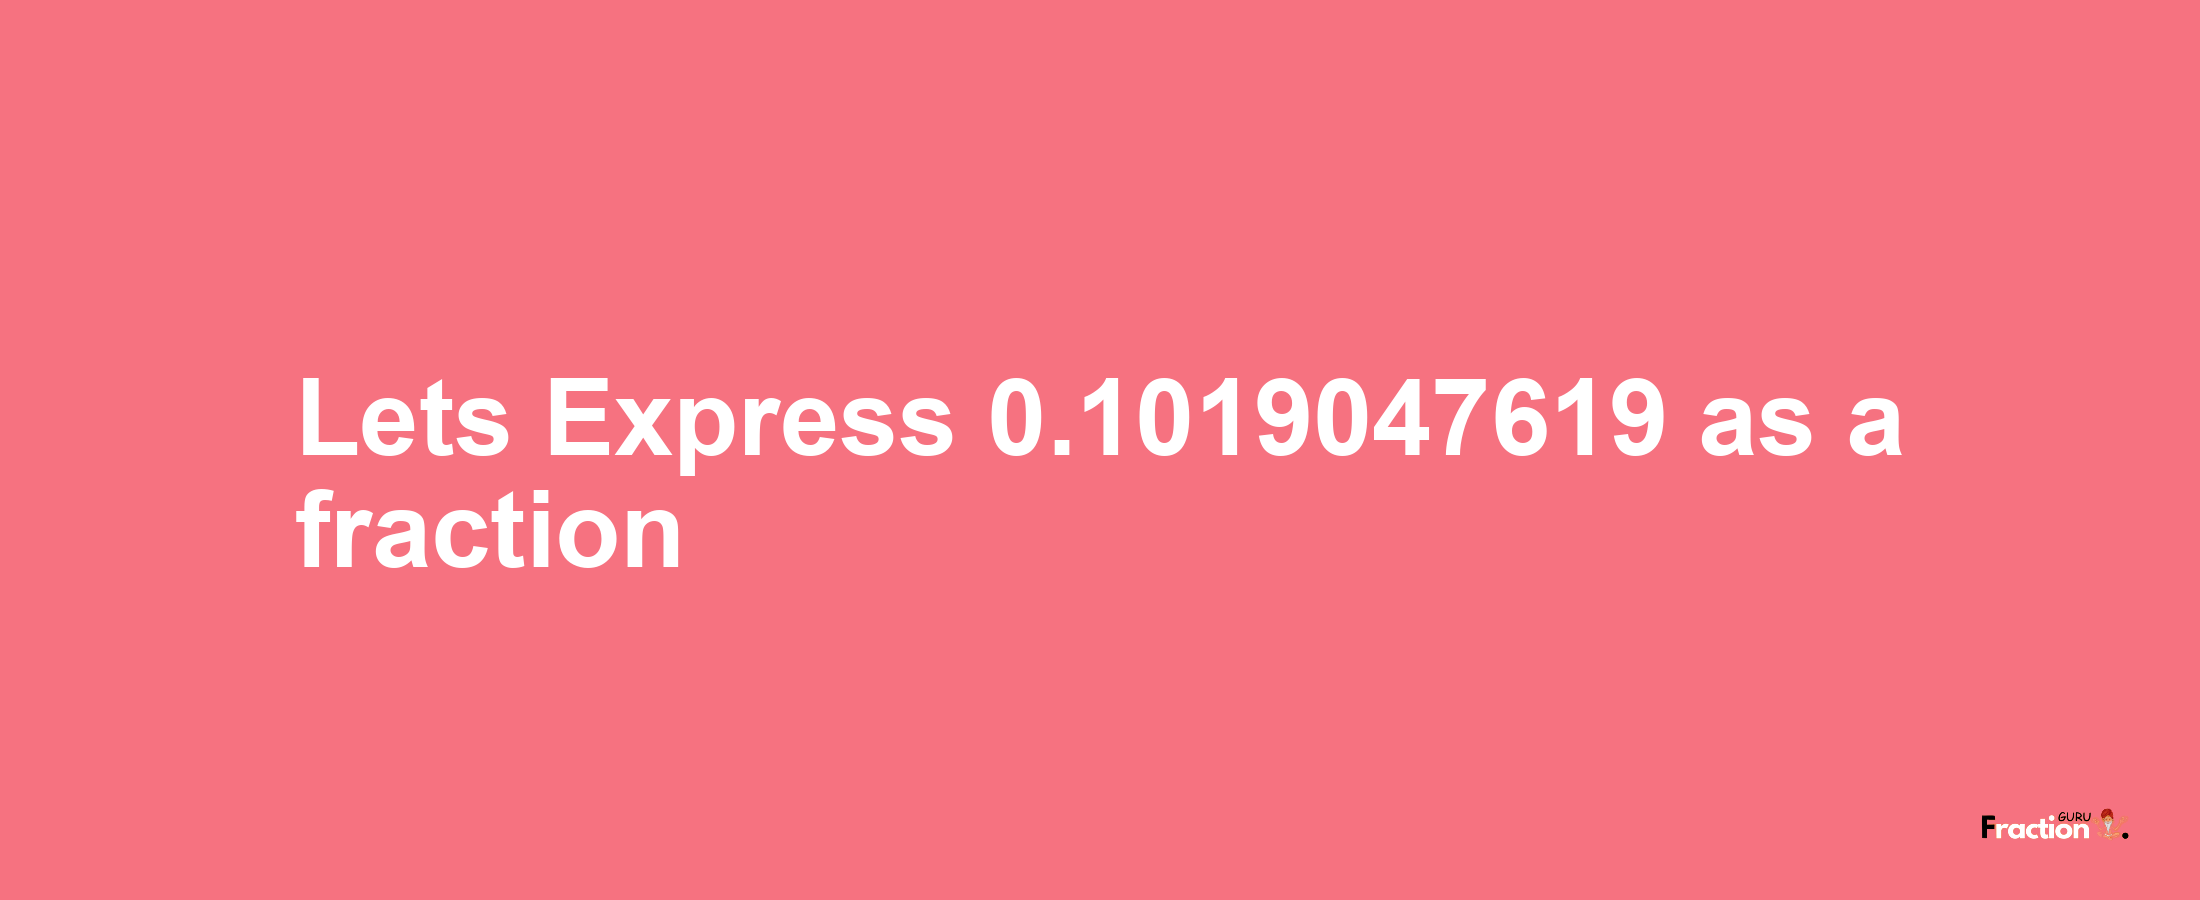 Lets Express 0.1019047619 as afraction